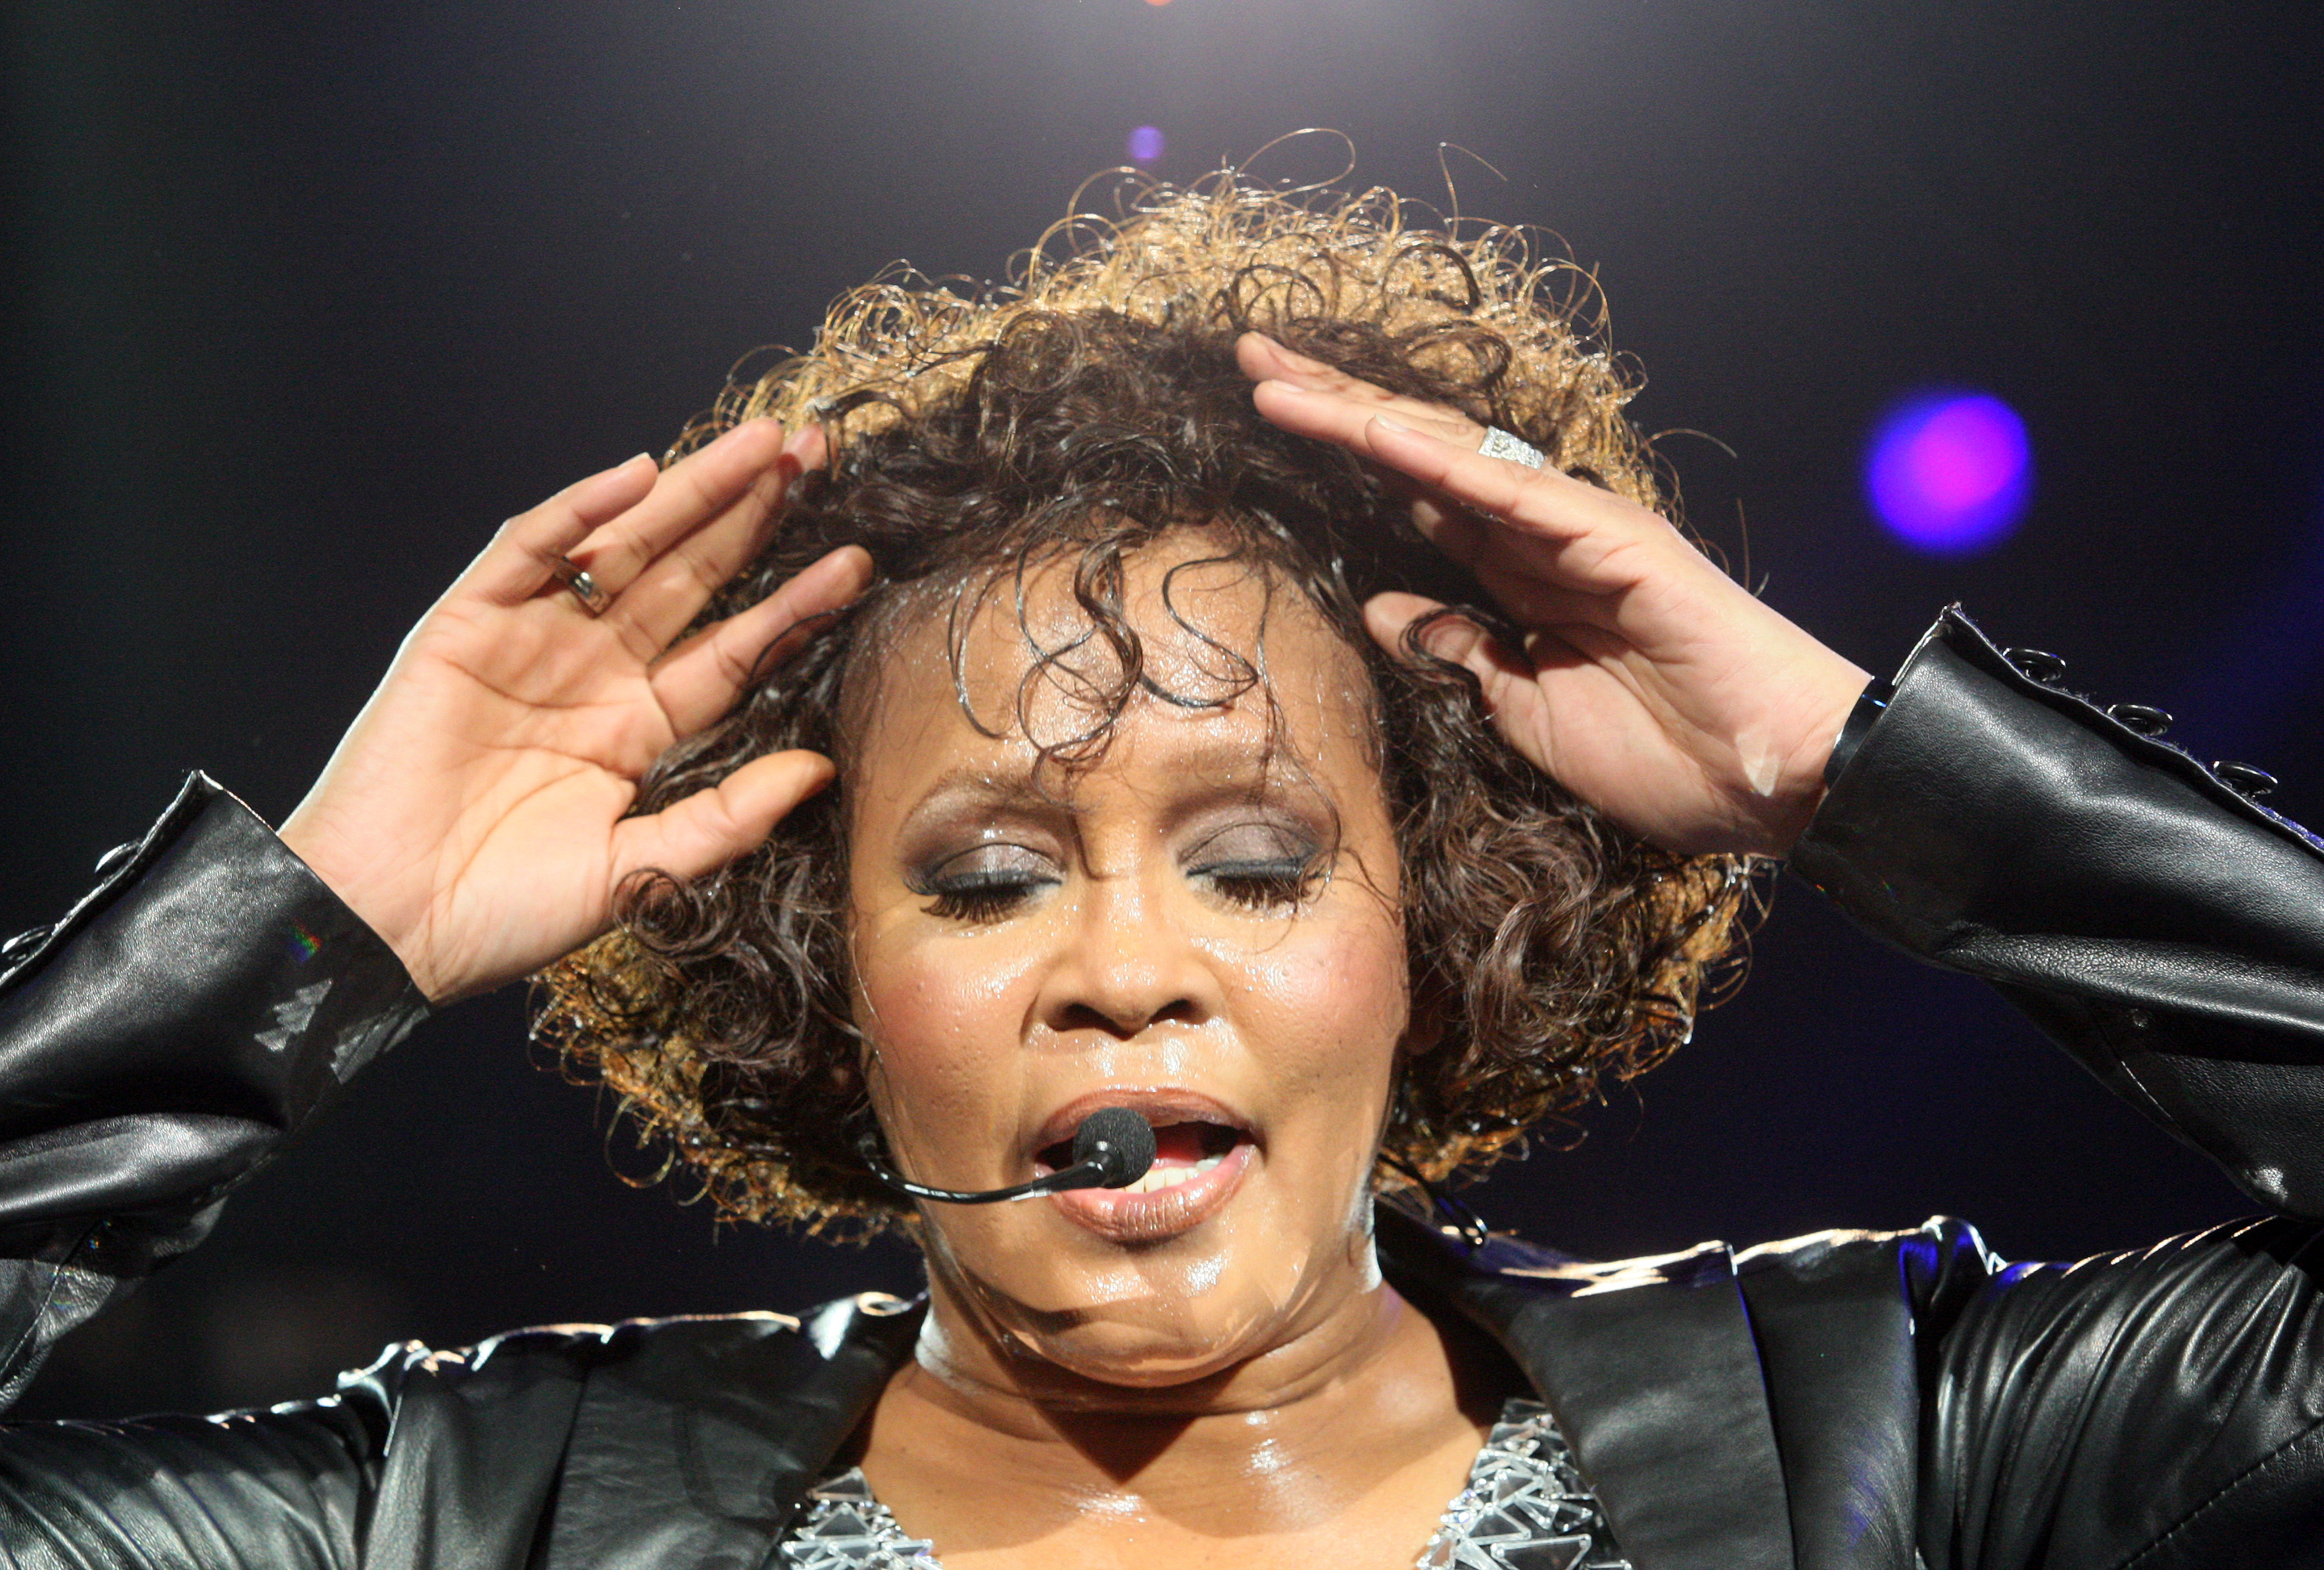 Whitney Houston performs on stage at Arena Nurnberger in Nuremberg, Germany, on May 27, 2010. | Source: Getty Images